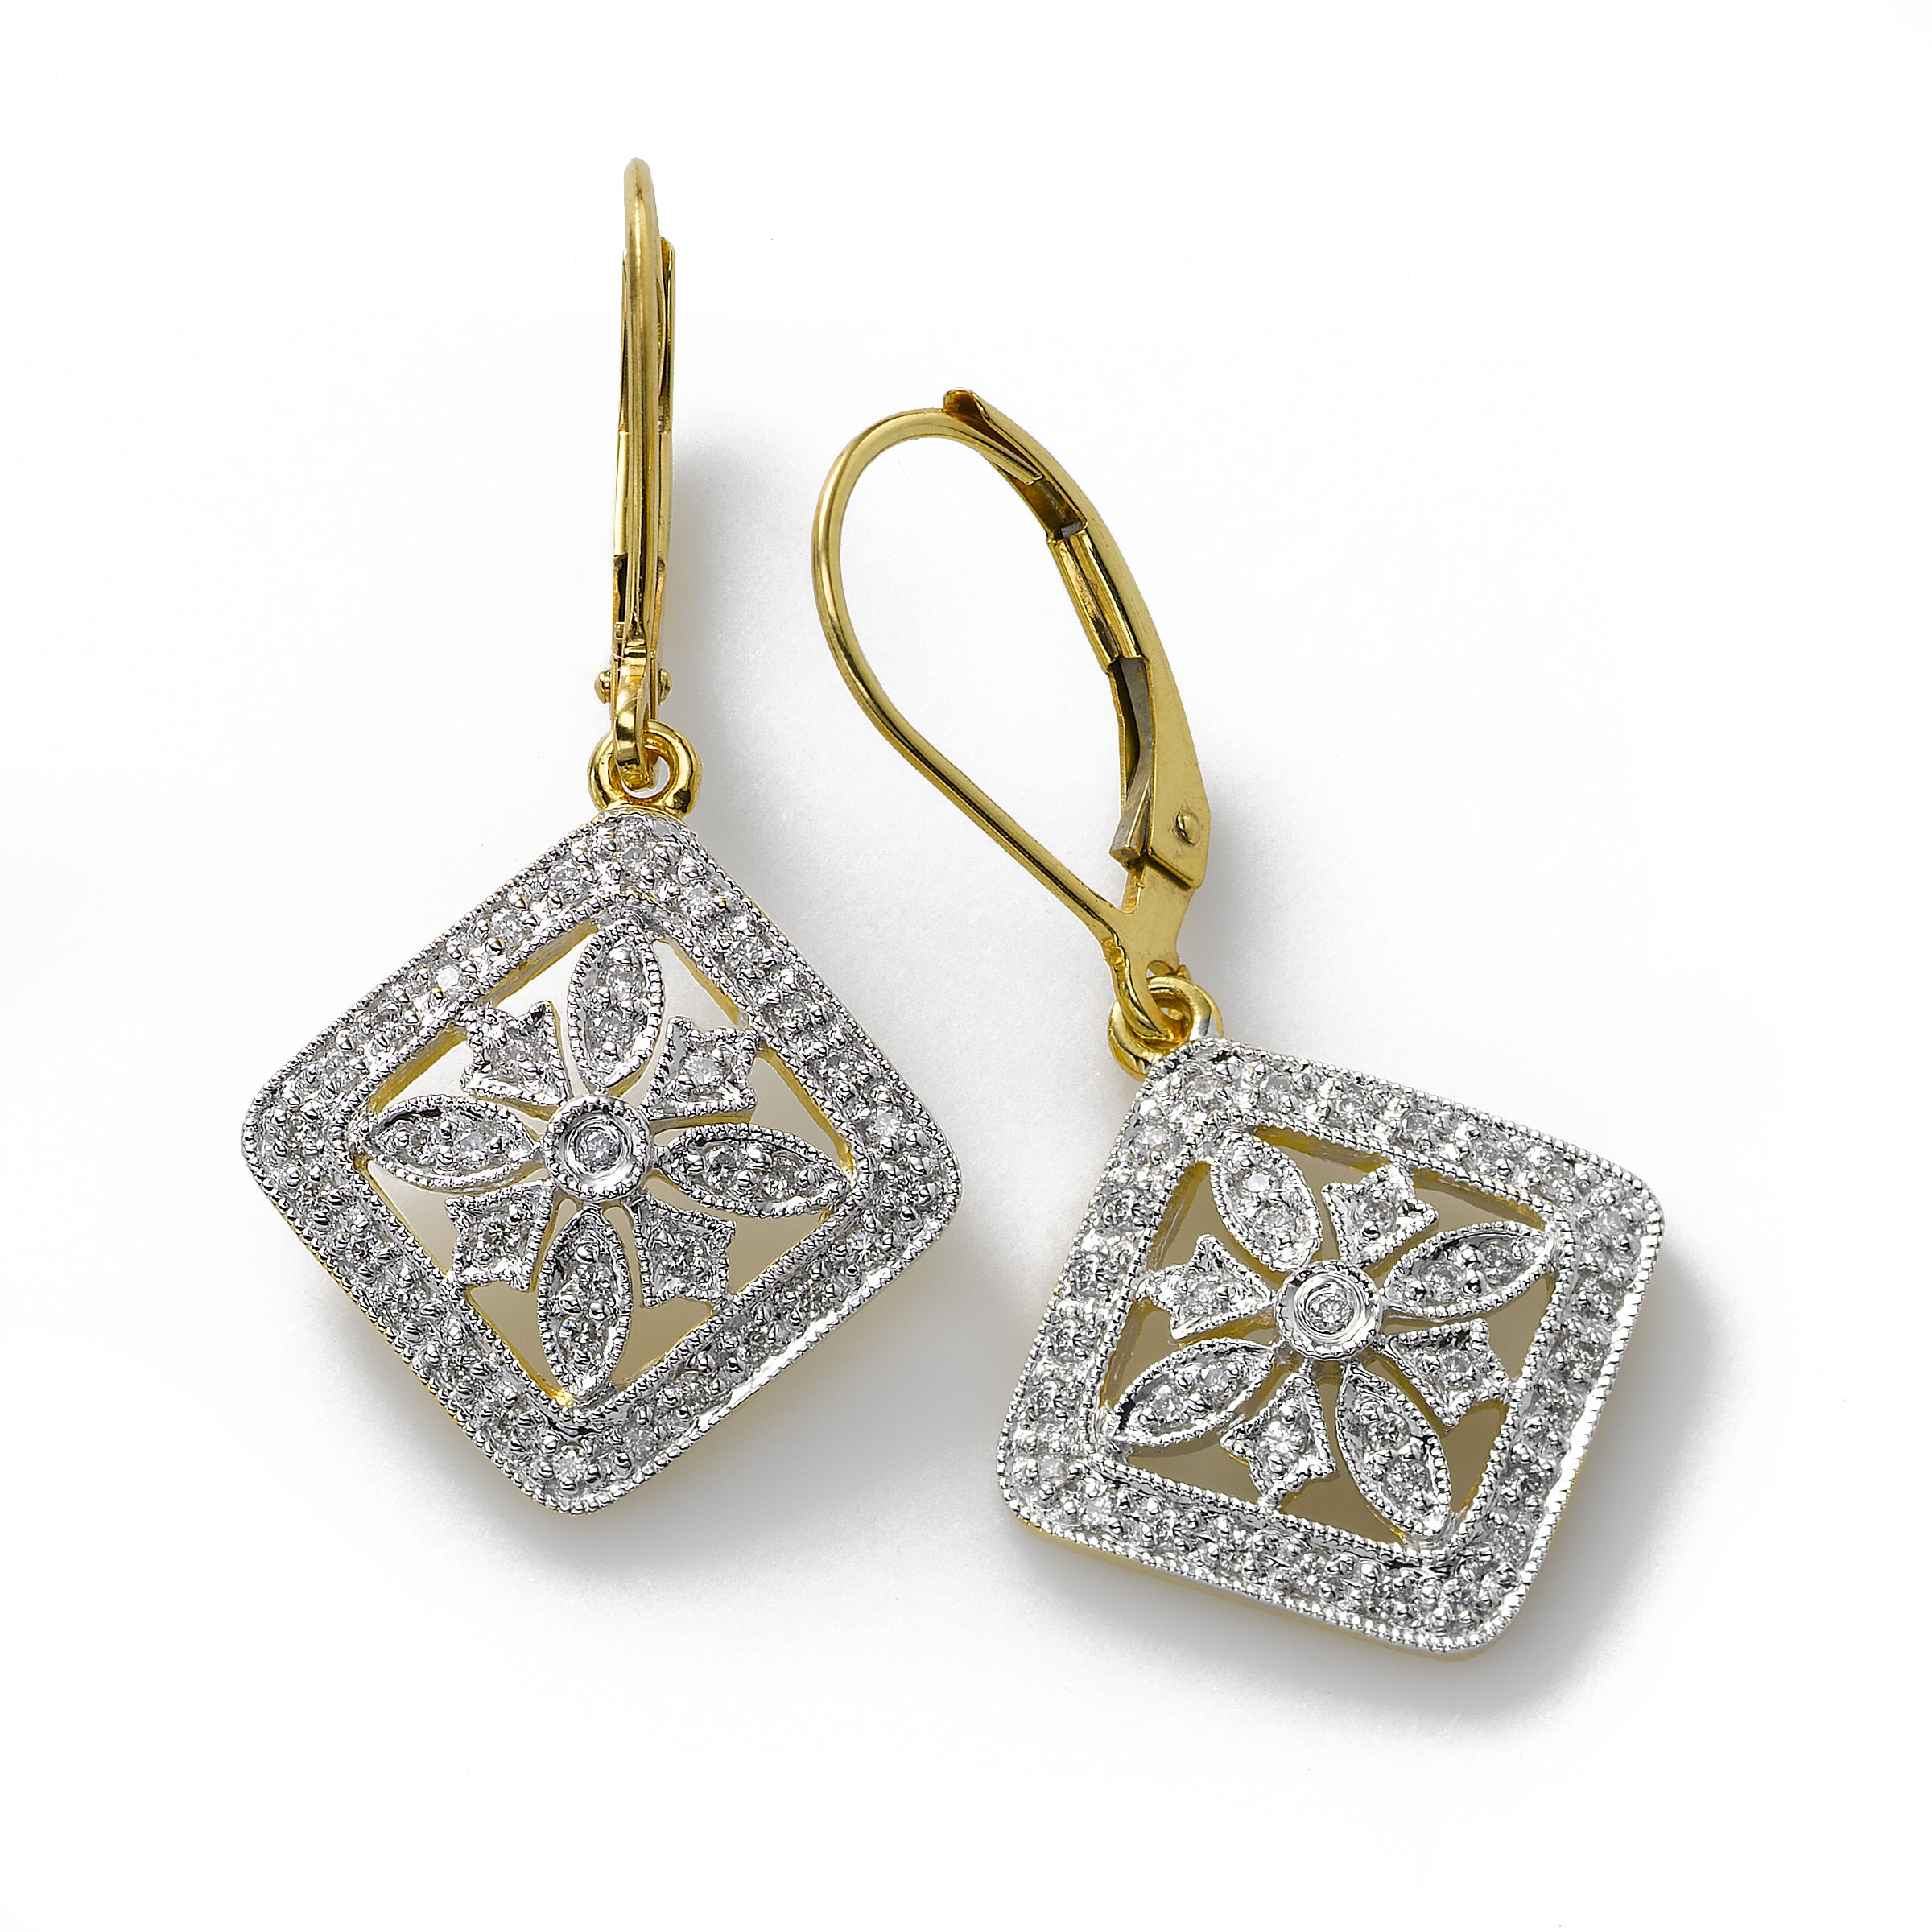 Textured Square Pave Diamond Earring Studs in 14k Gold - Filigree